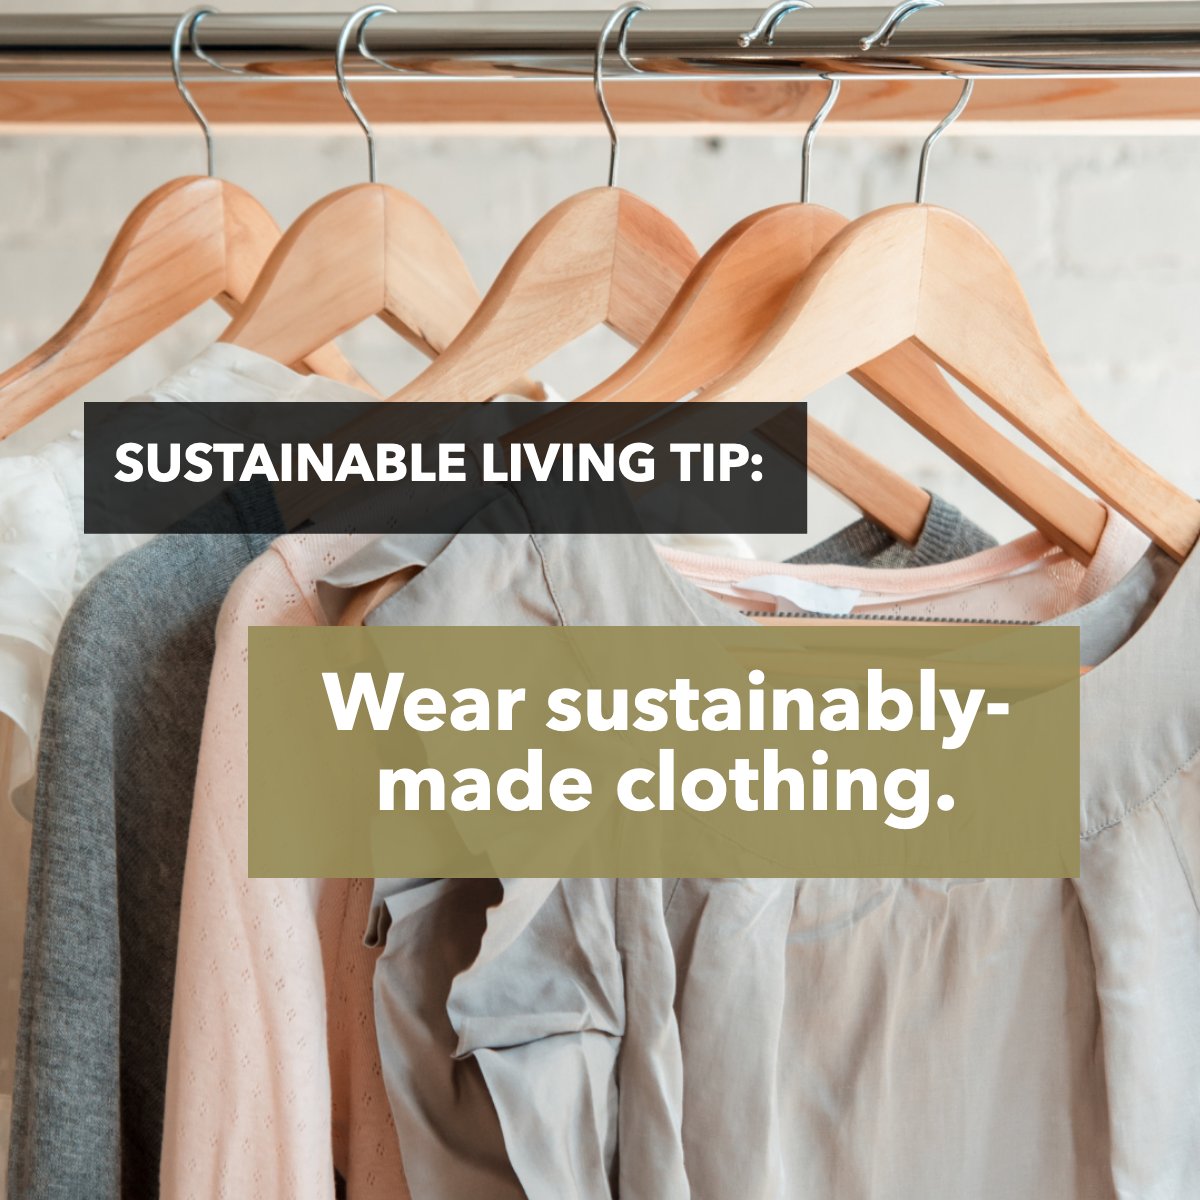 💚 Sustainable fashion 👕 is a design philosophy and movement that promotes environmental and social responsibility! 🌳

Are you part of this movement yet? 💪

#sustainable #fashion #clothes #thinkgreen
 #realestate #realtor #newhome #househunting #renatashomes